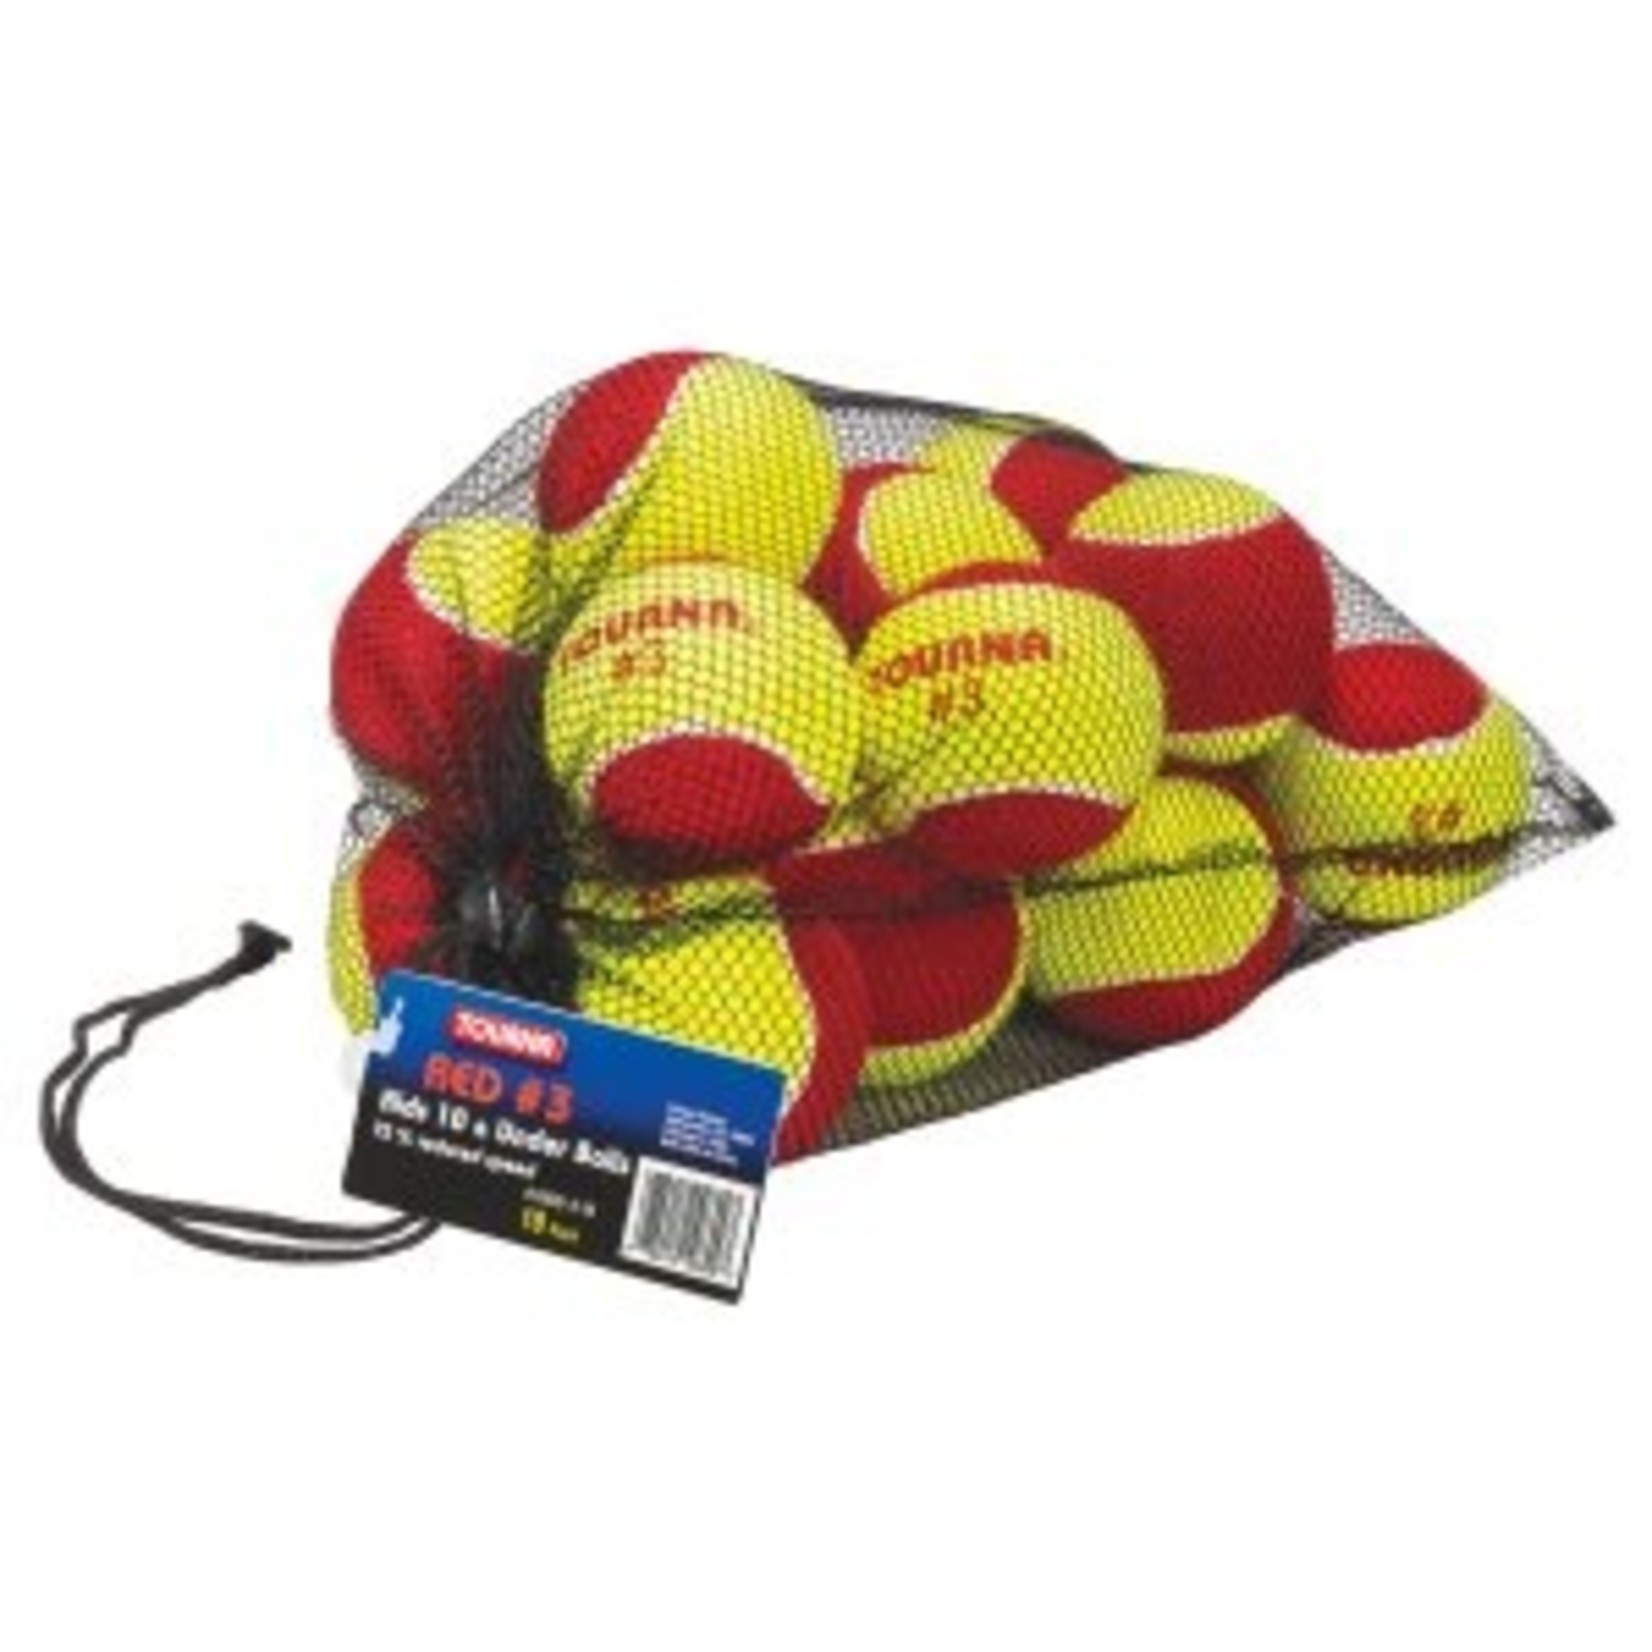 Tourna Red Ball 75% Reduced Speed